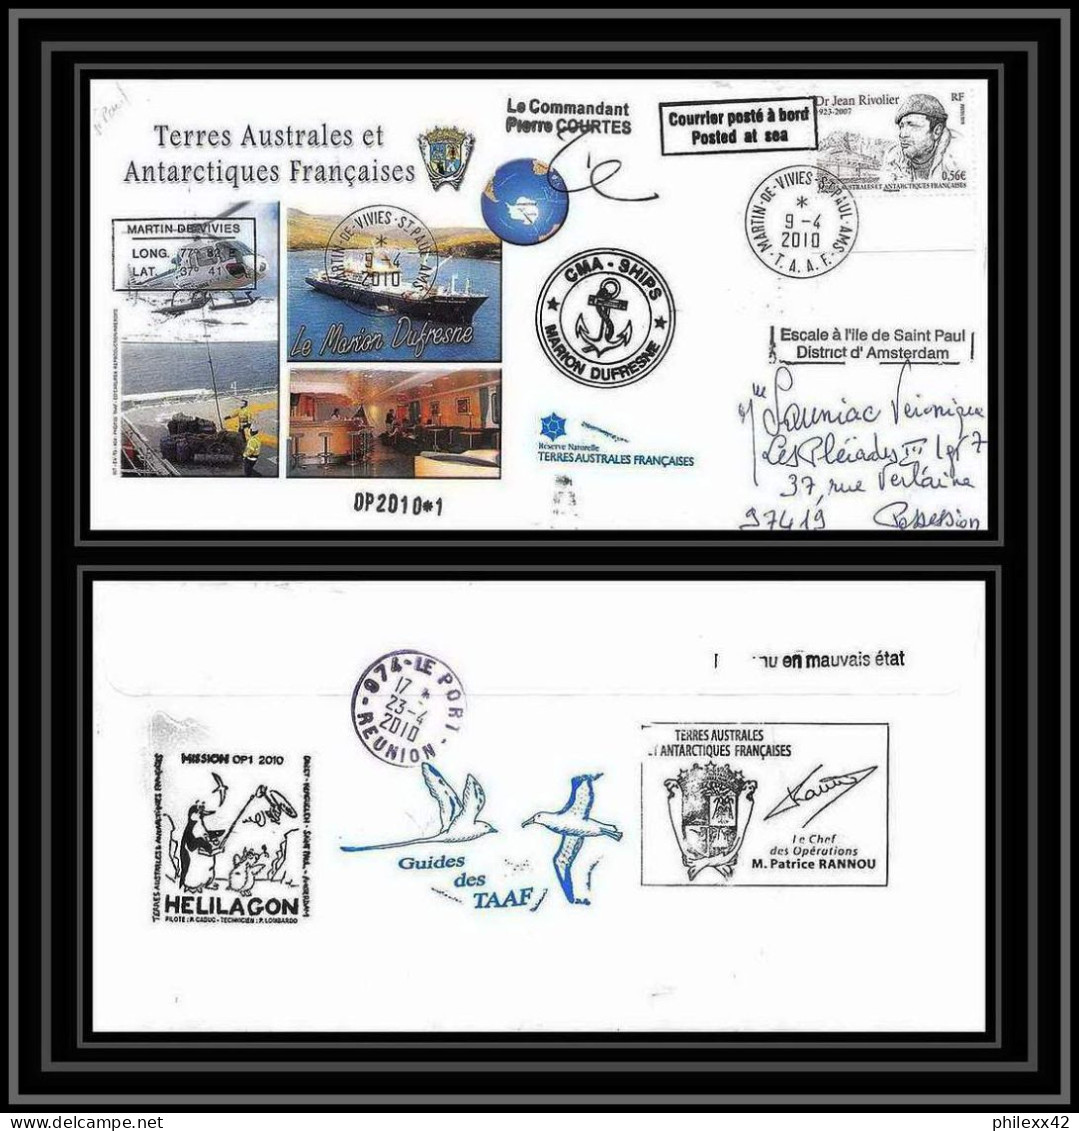 2997 Helilagon Terres Australes TAAF Lettre Cover Dufresne 2 Signé Signed St Paul Op 2010/1 9/4/2010 N°557 - Helicópteros